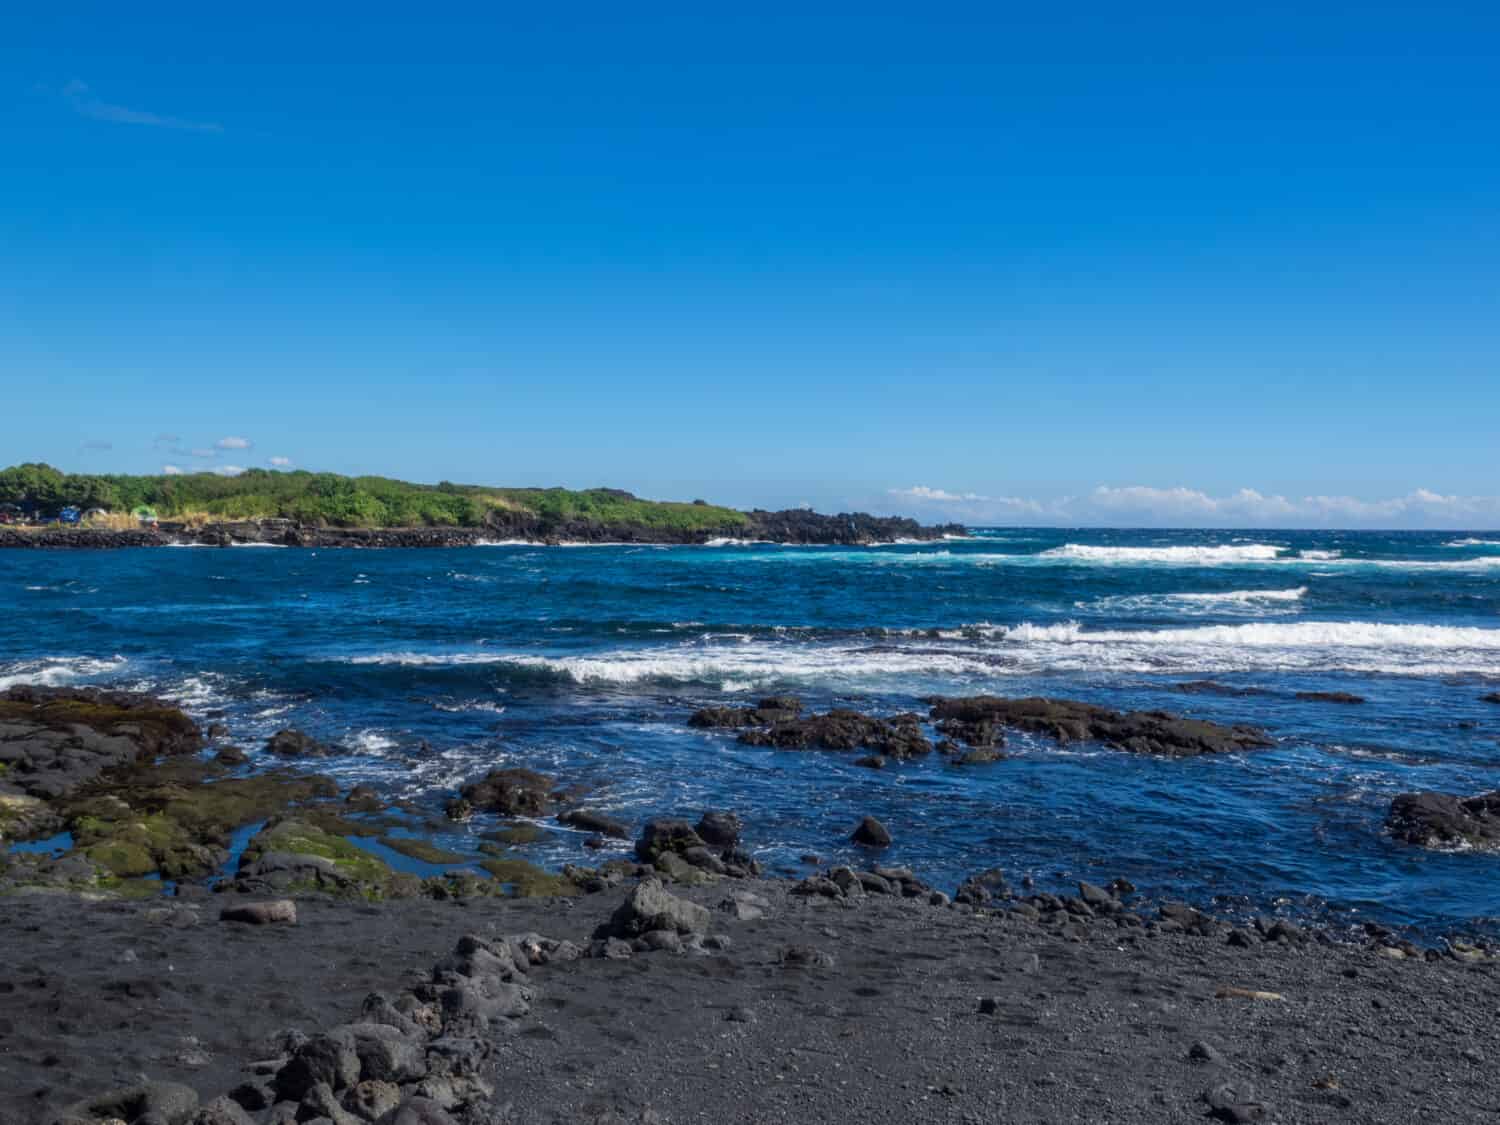 Punaluu Beach has black sand made of basalt and created by lava flowing into the ocean which explodes as it reaches the ocean and cools.